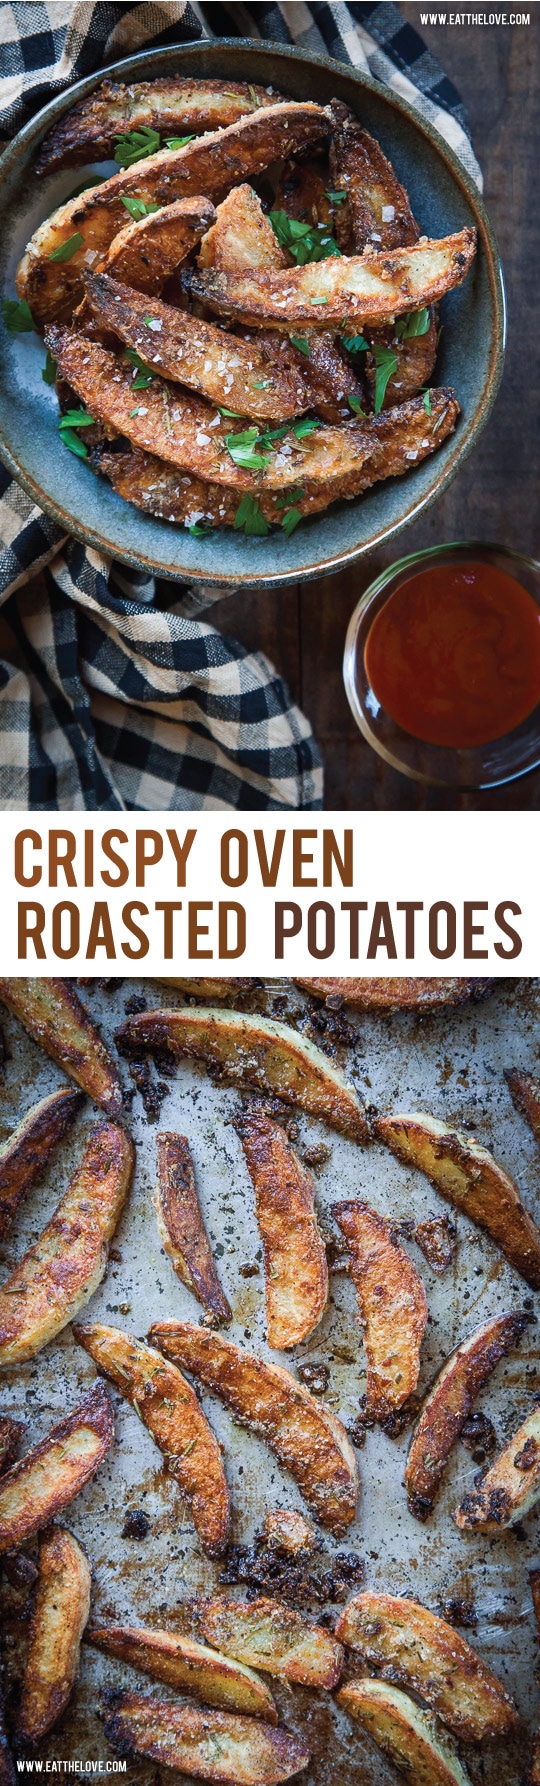 Crispy Oven Roasted Potatoes. Photo and recipe by Irvin Lin of Eat the Love.